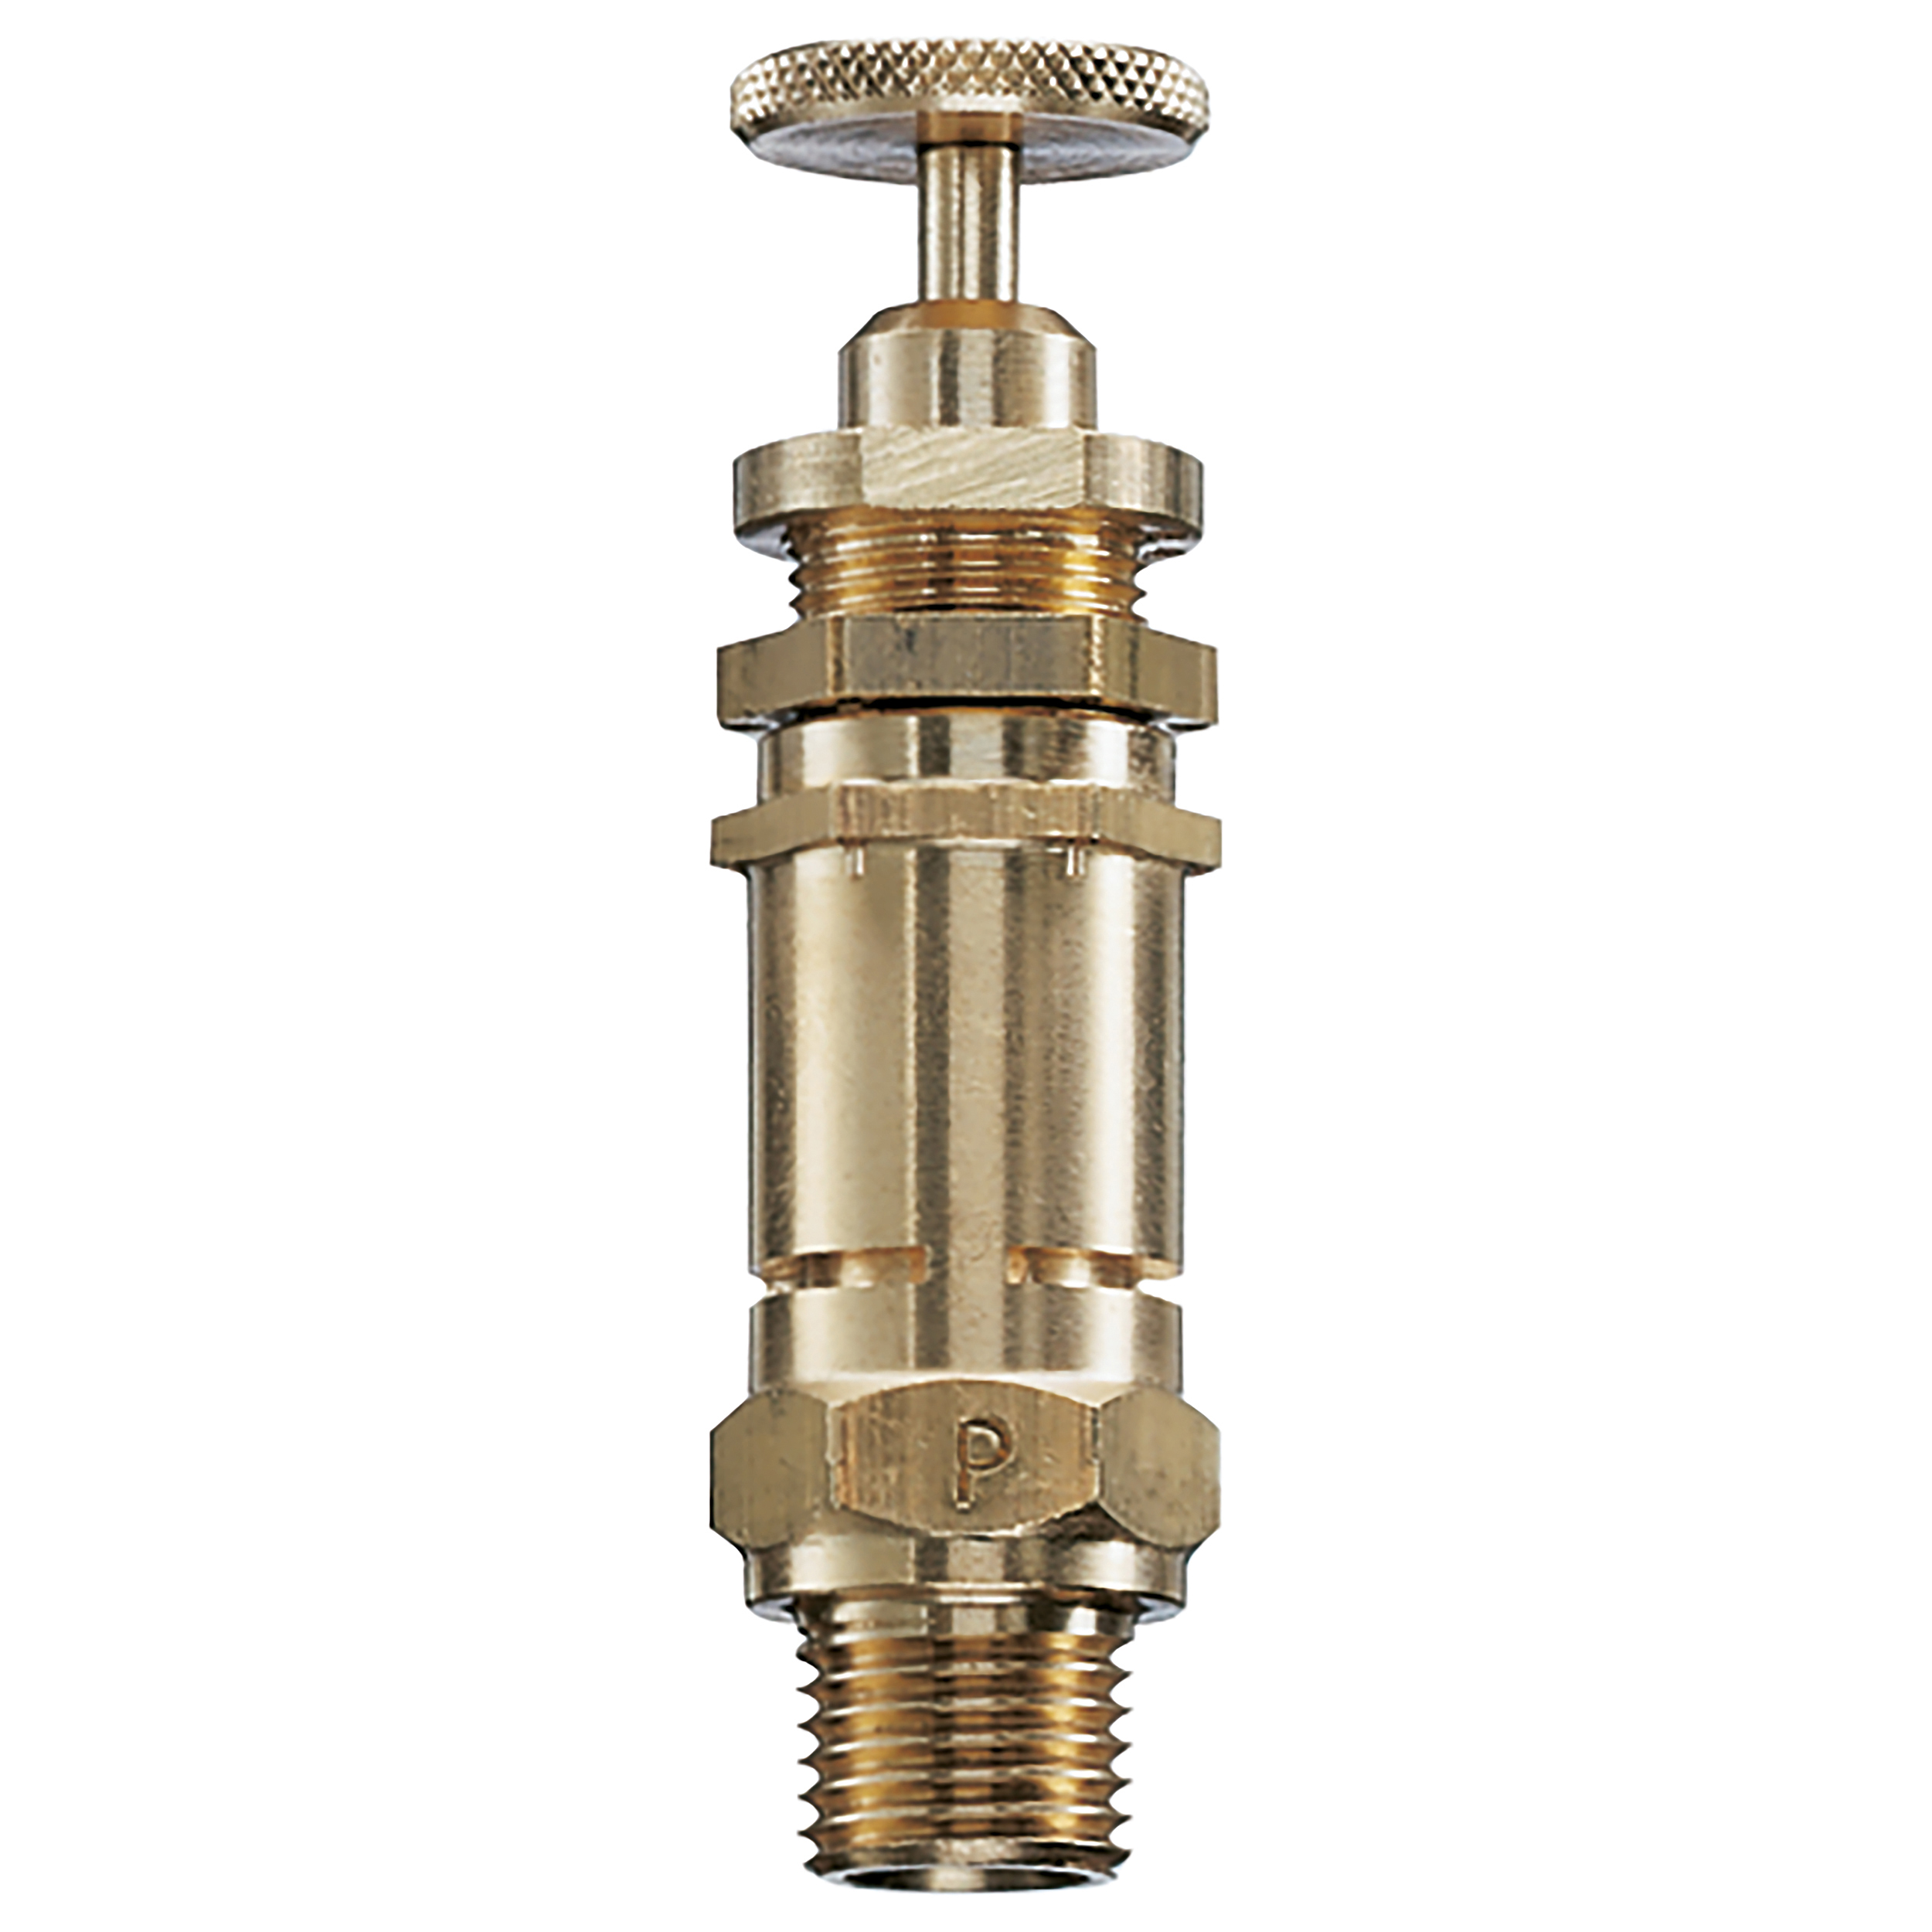 Blow-off valve DN 6, G ¼, set pressure: 5.7 bar (83 psi), seal: NBR, not component tested